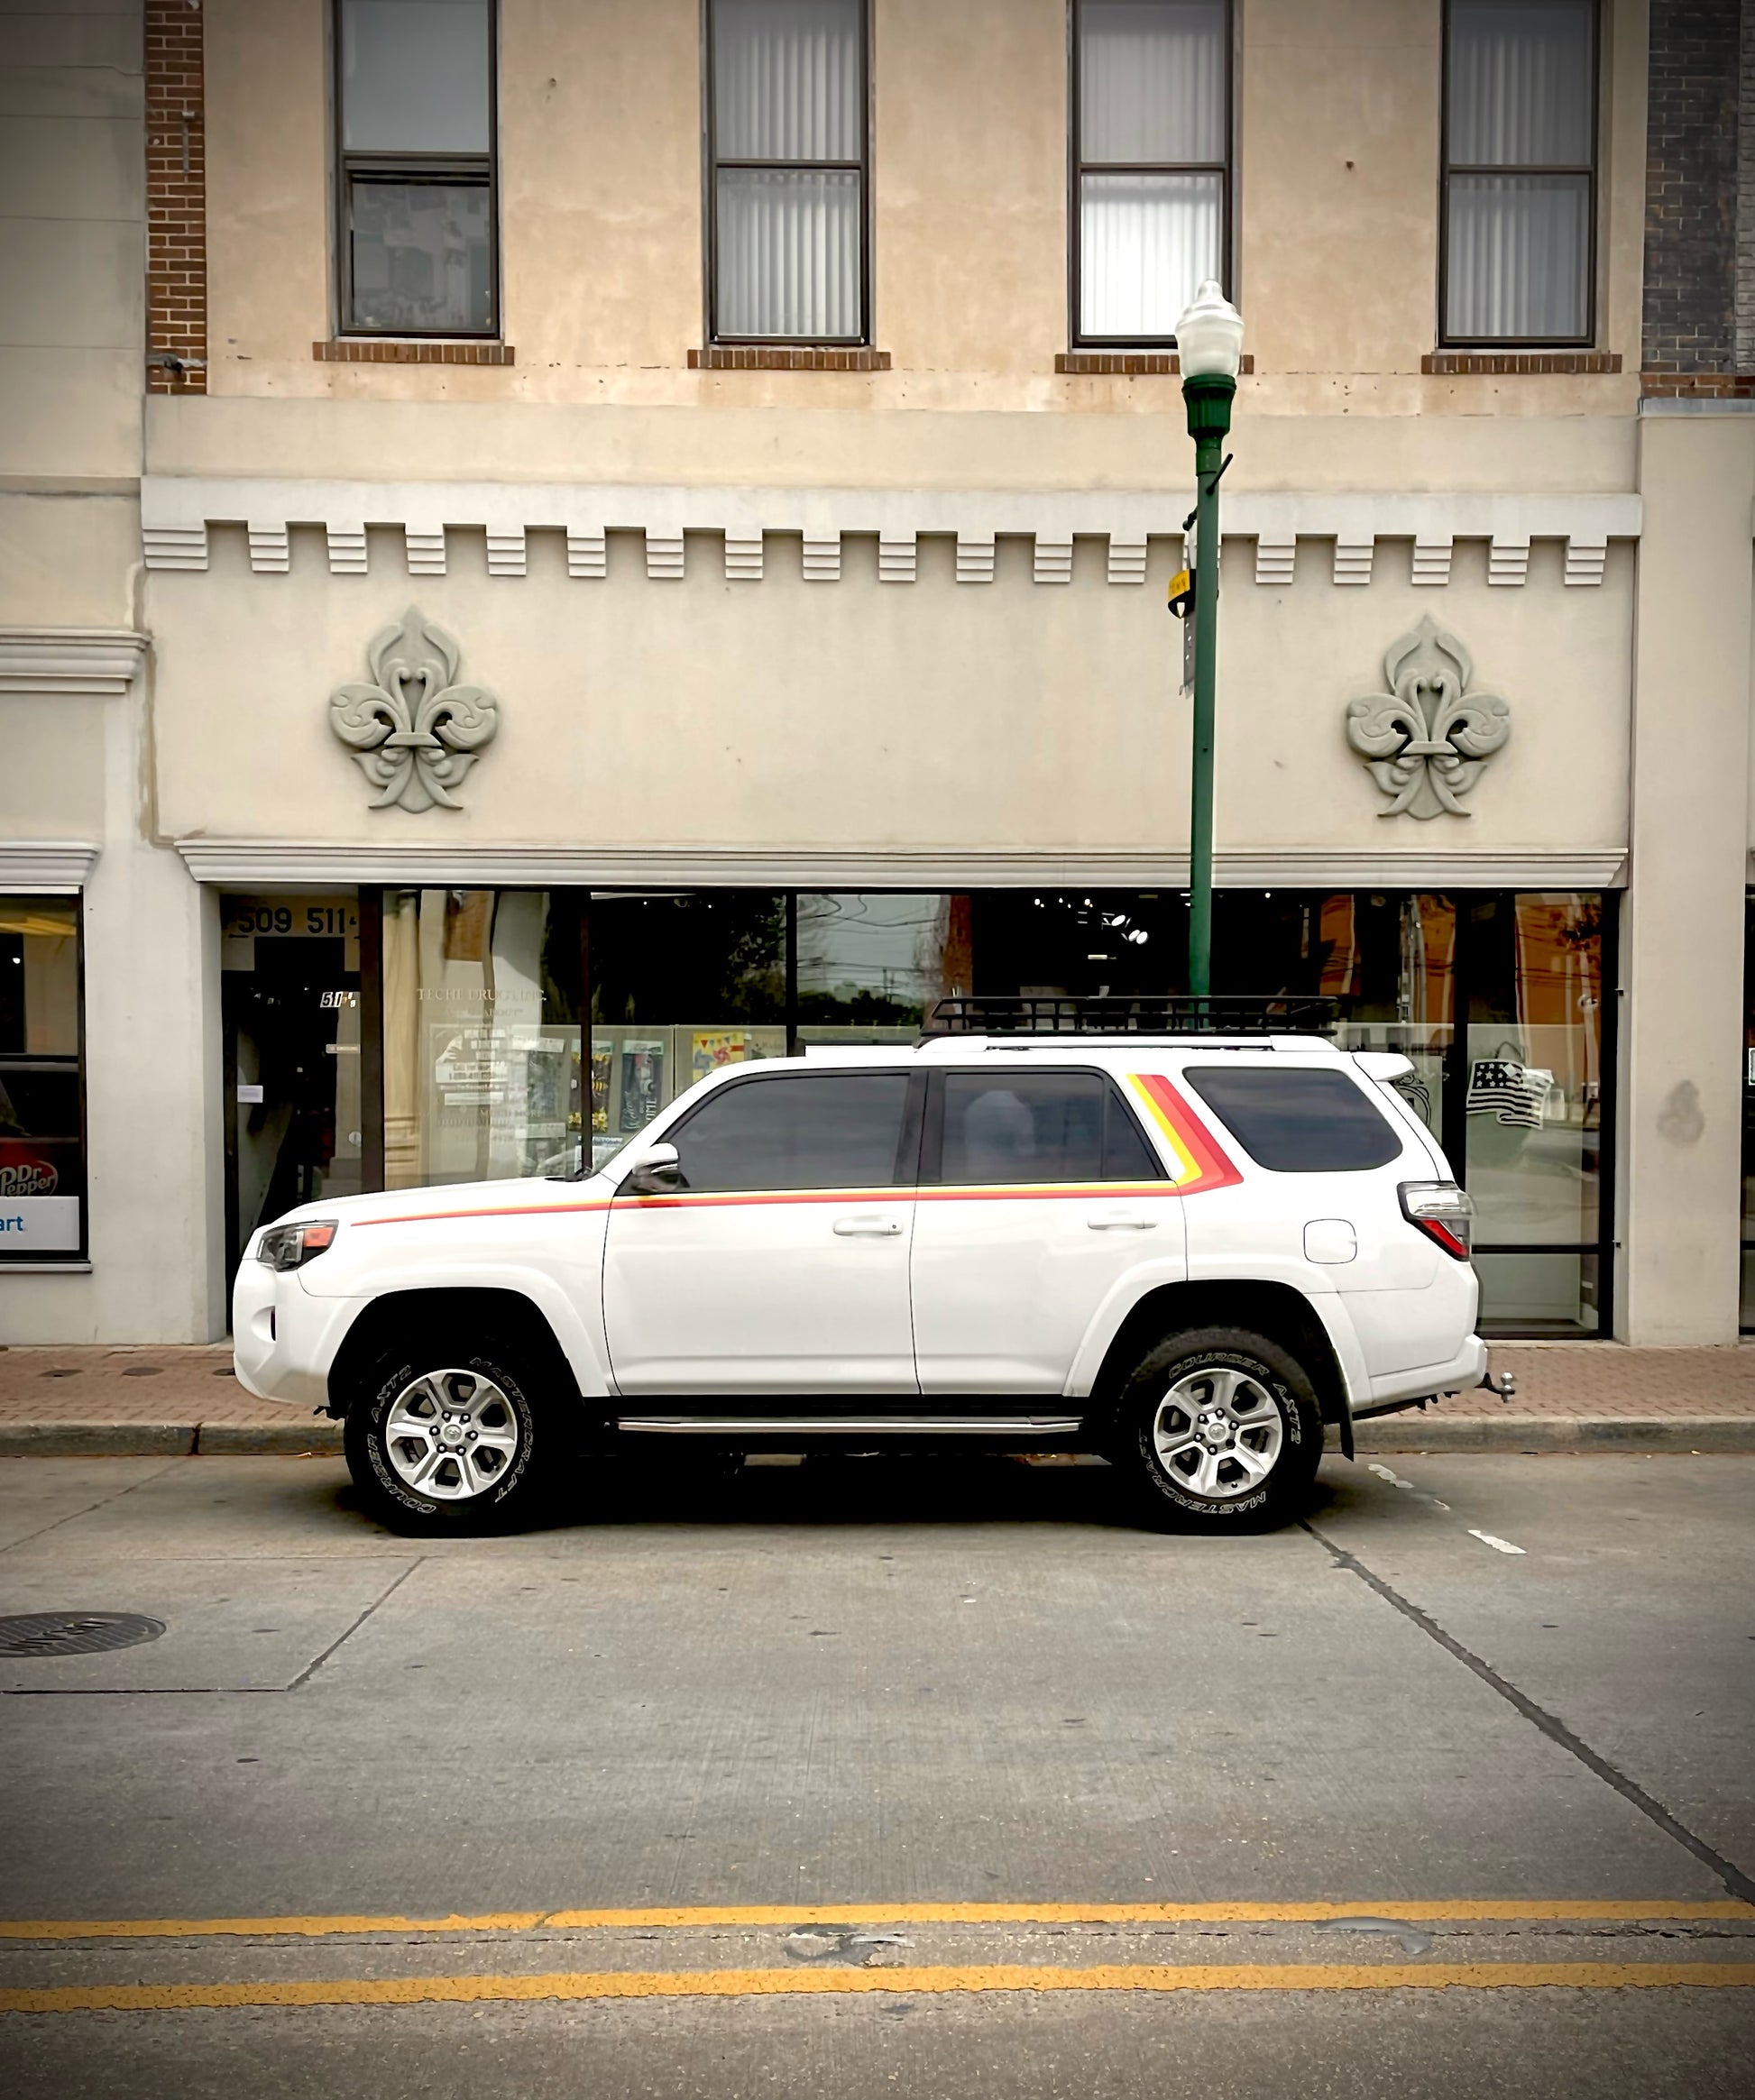 Toyota 4runner in urban environment with side stripe decals